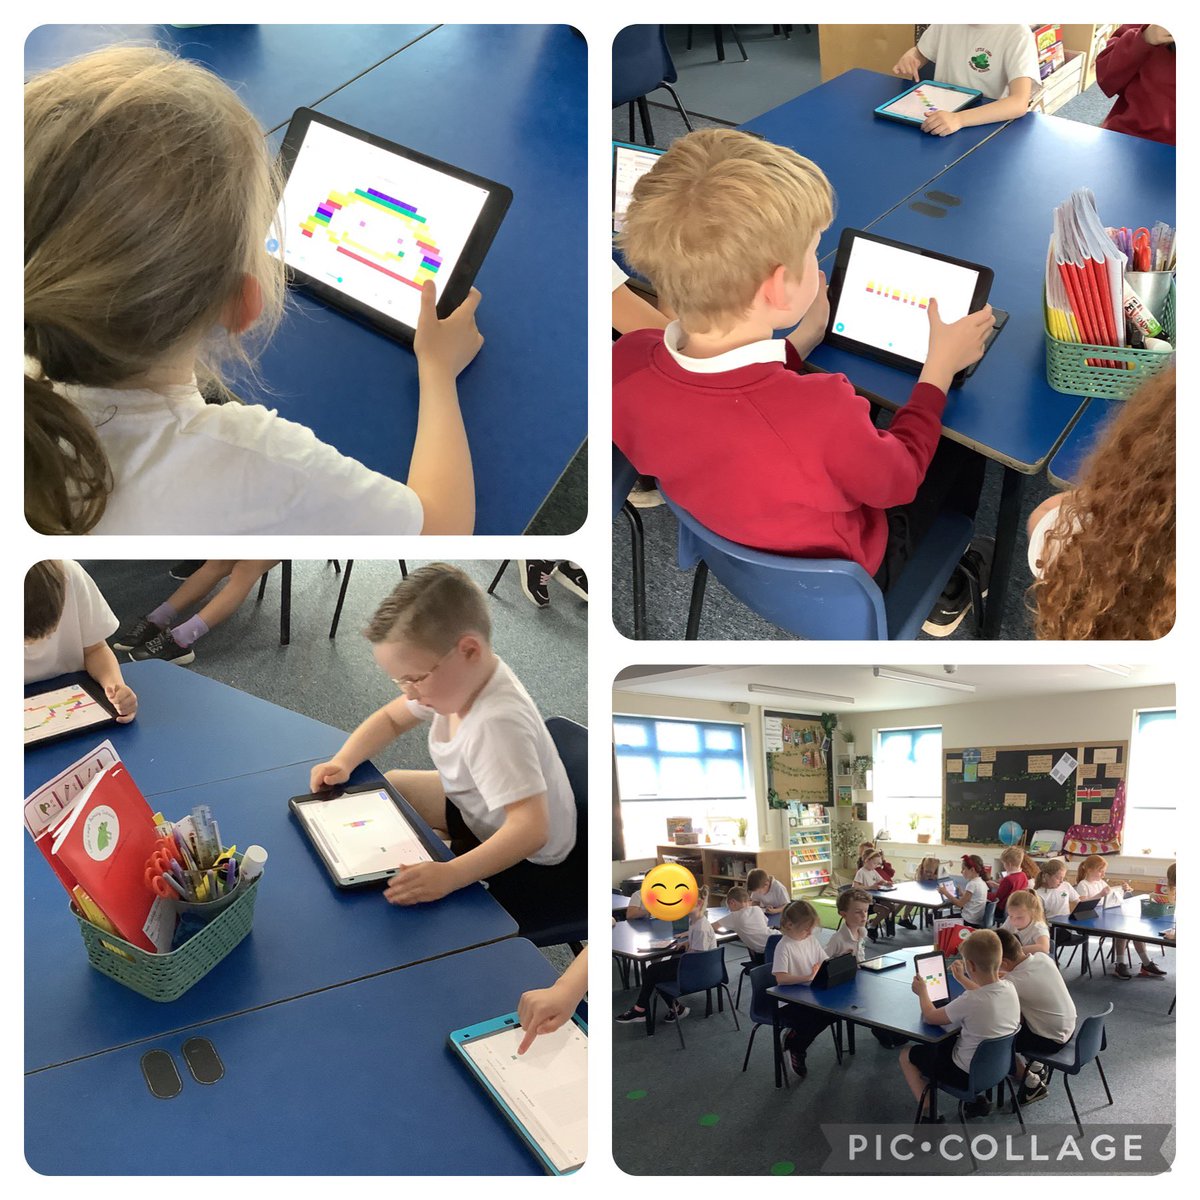 Year 2 had another fabulous computing lesson using Chrome music lab. This week they focused on tempo and notes. They also considered how their piece of music would make people feel when selecting the tempo and instruments. #llpscomputing